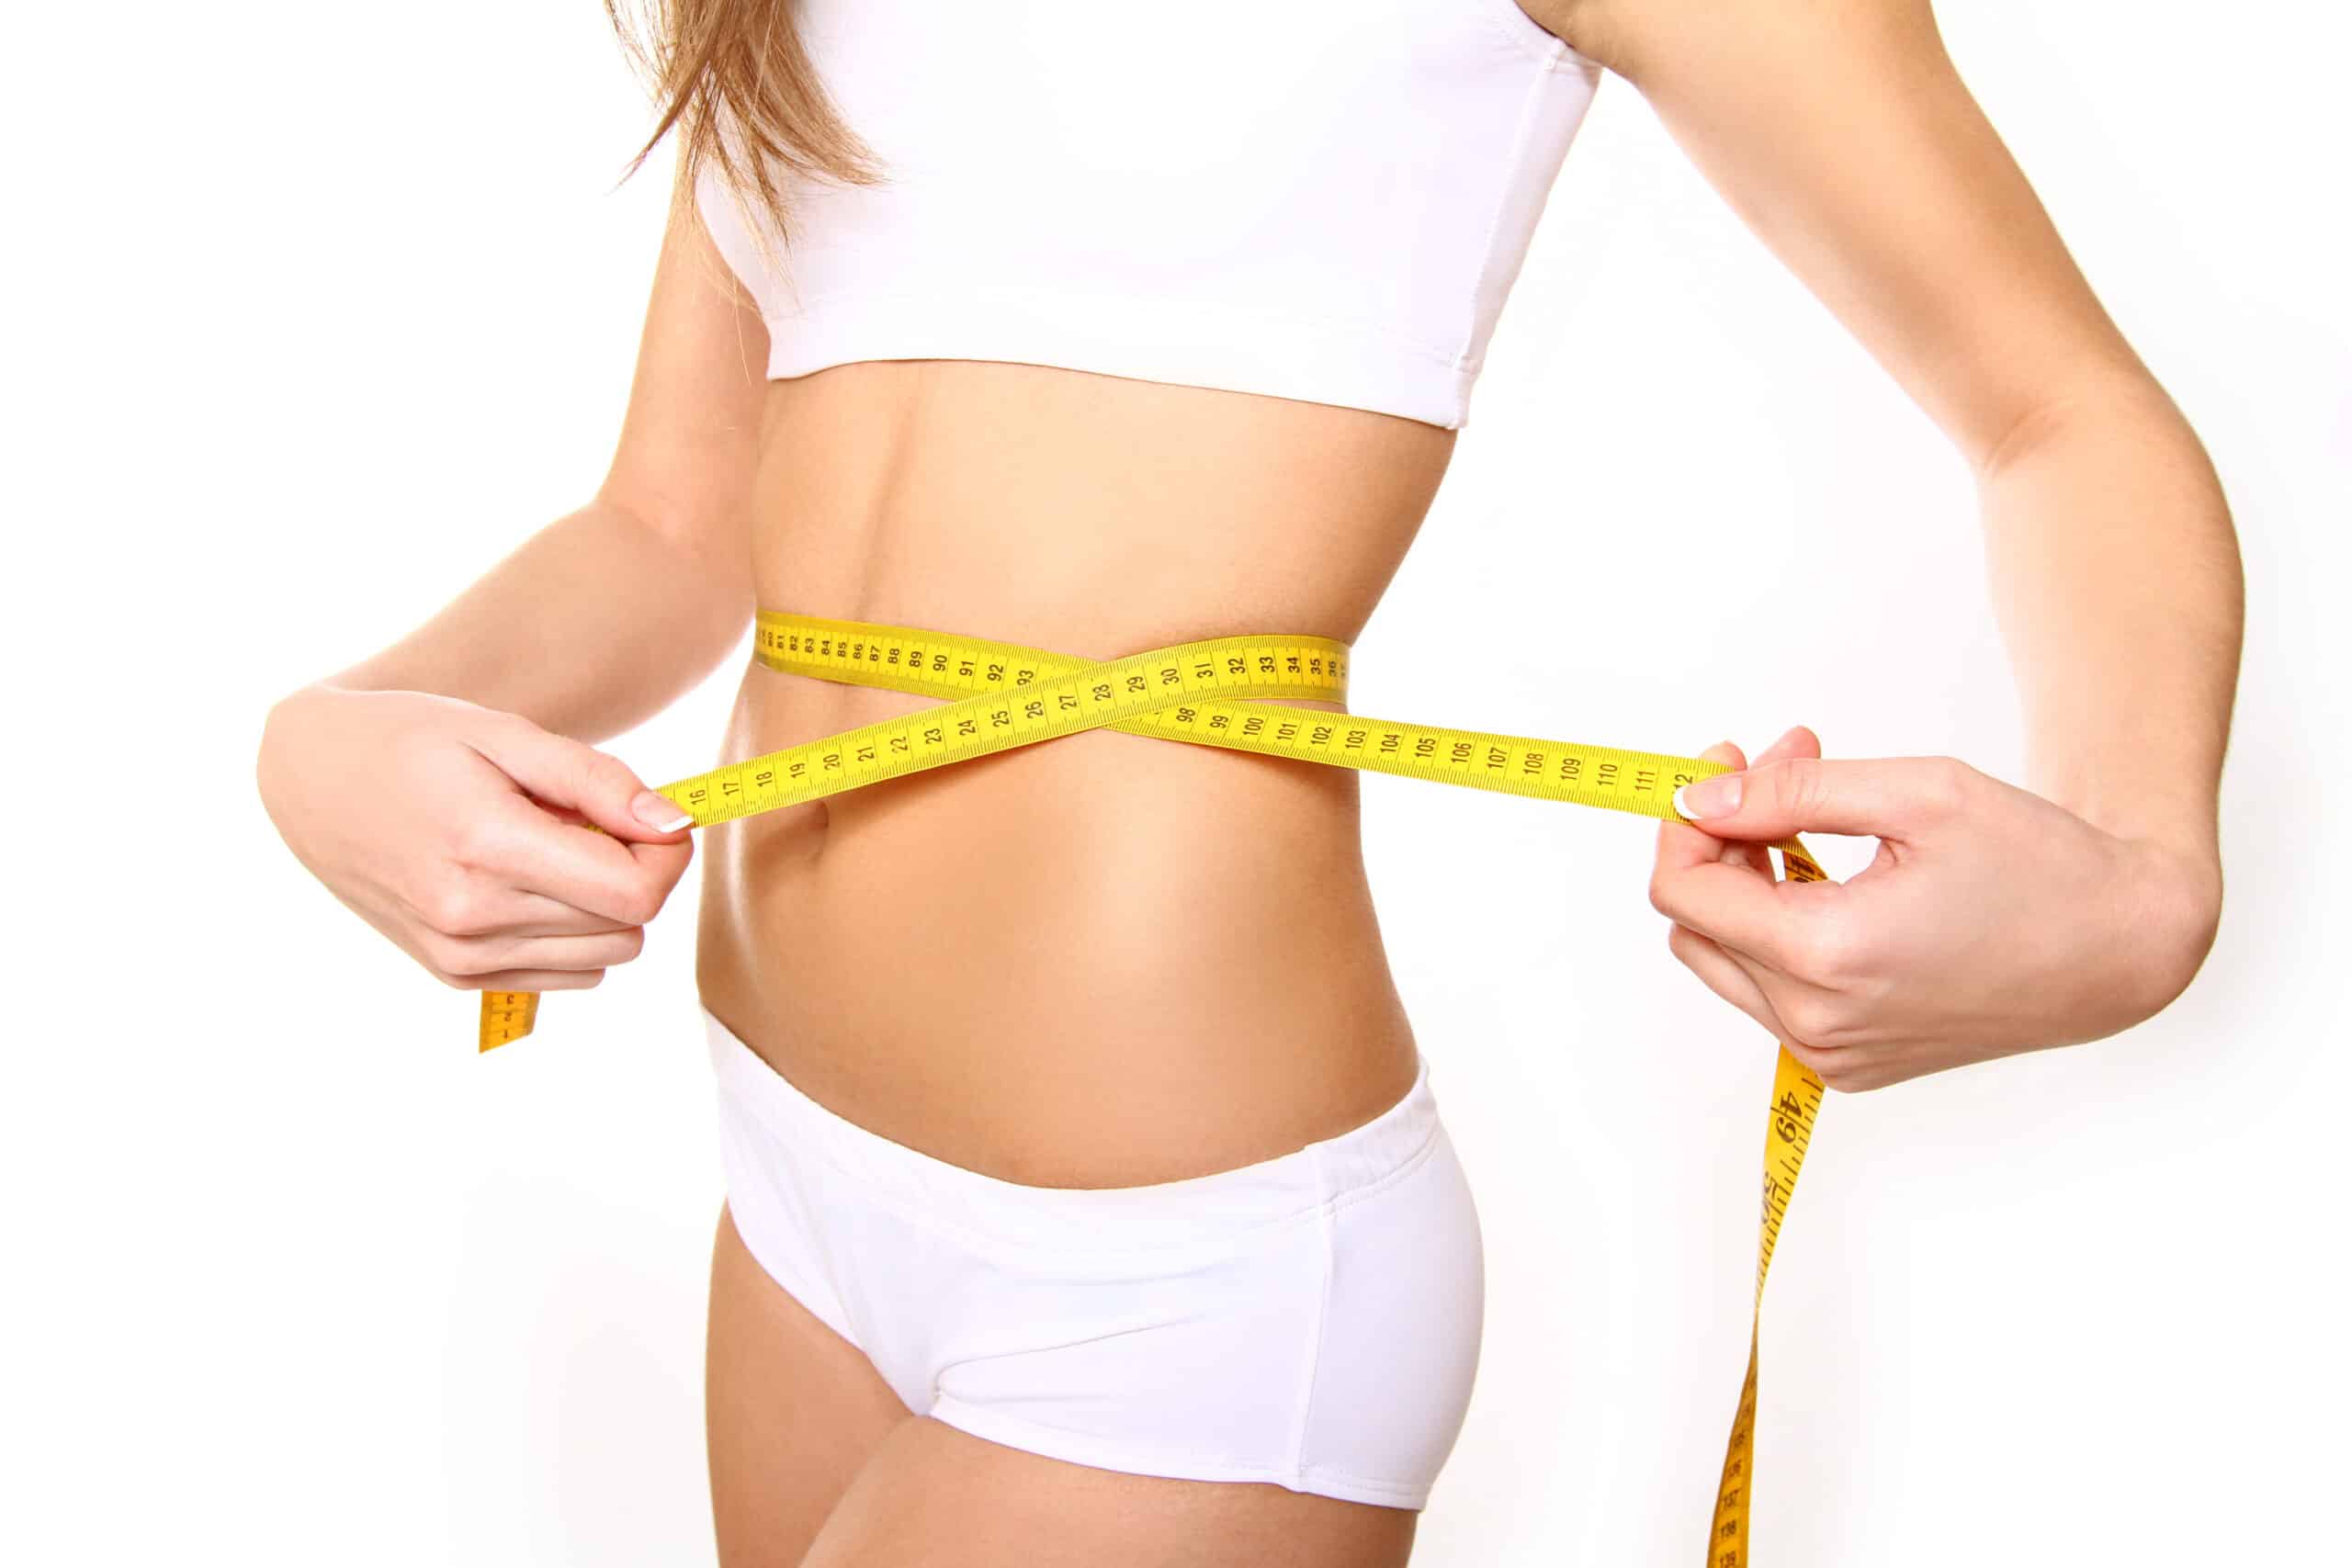 Medical Weight Loss Programs by Urban Medspa & Weight Loss Center in Charlotte NC